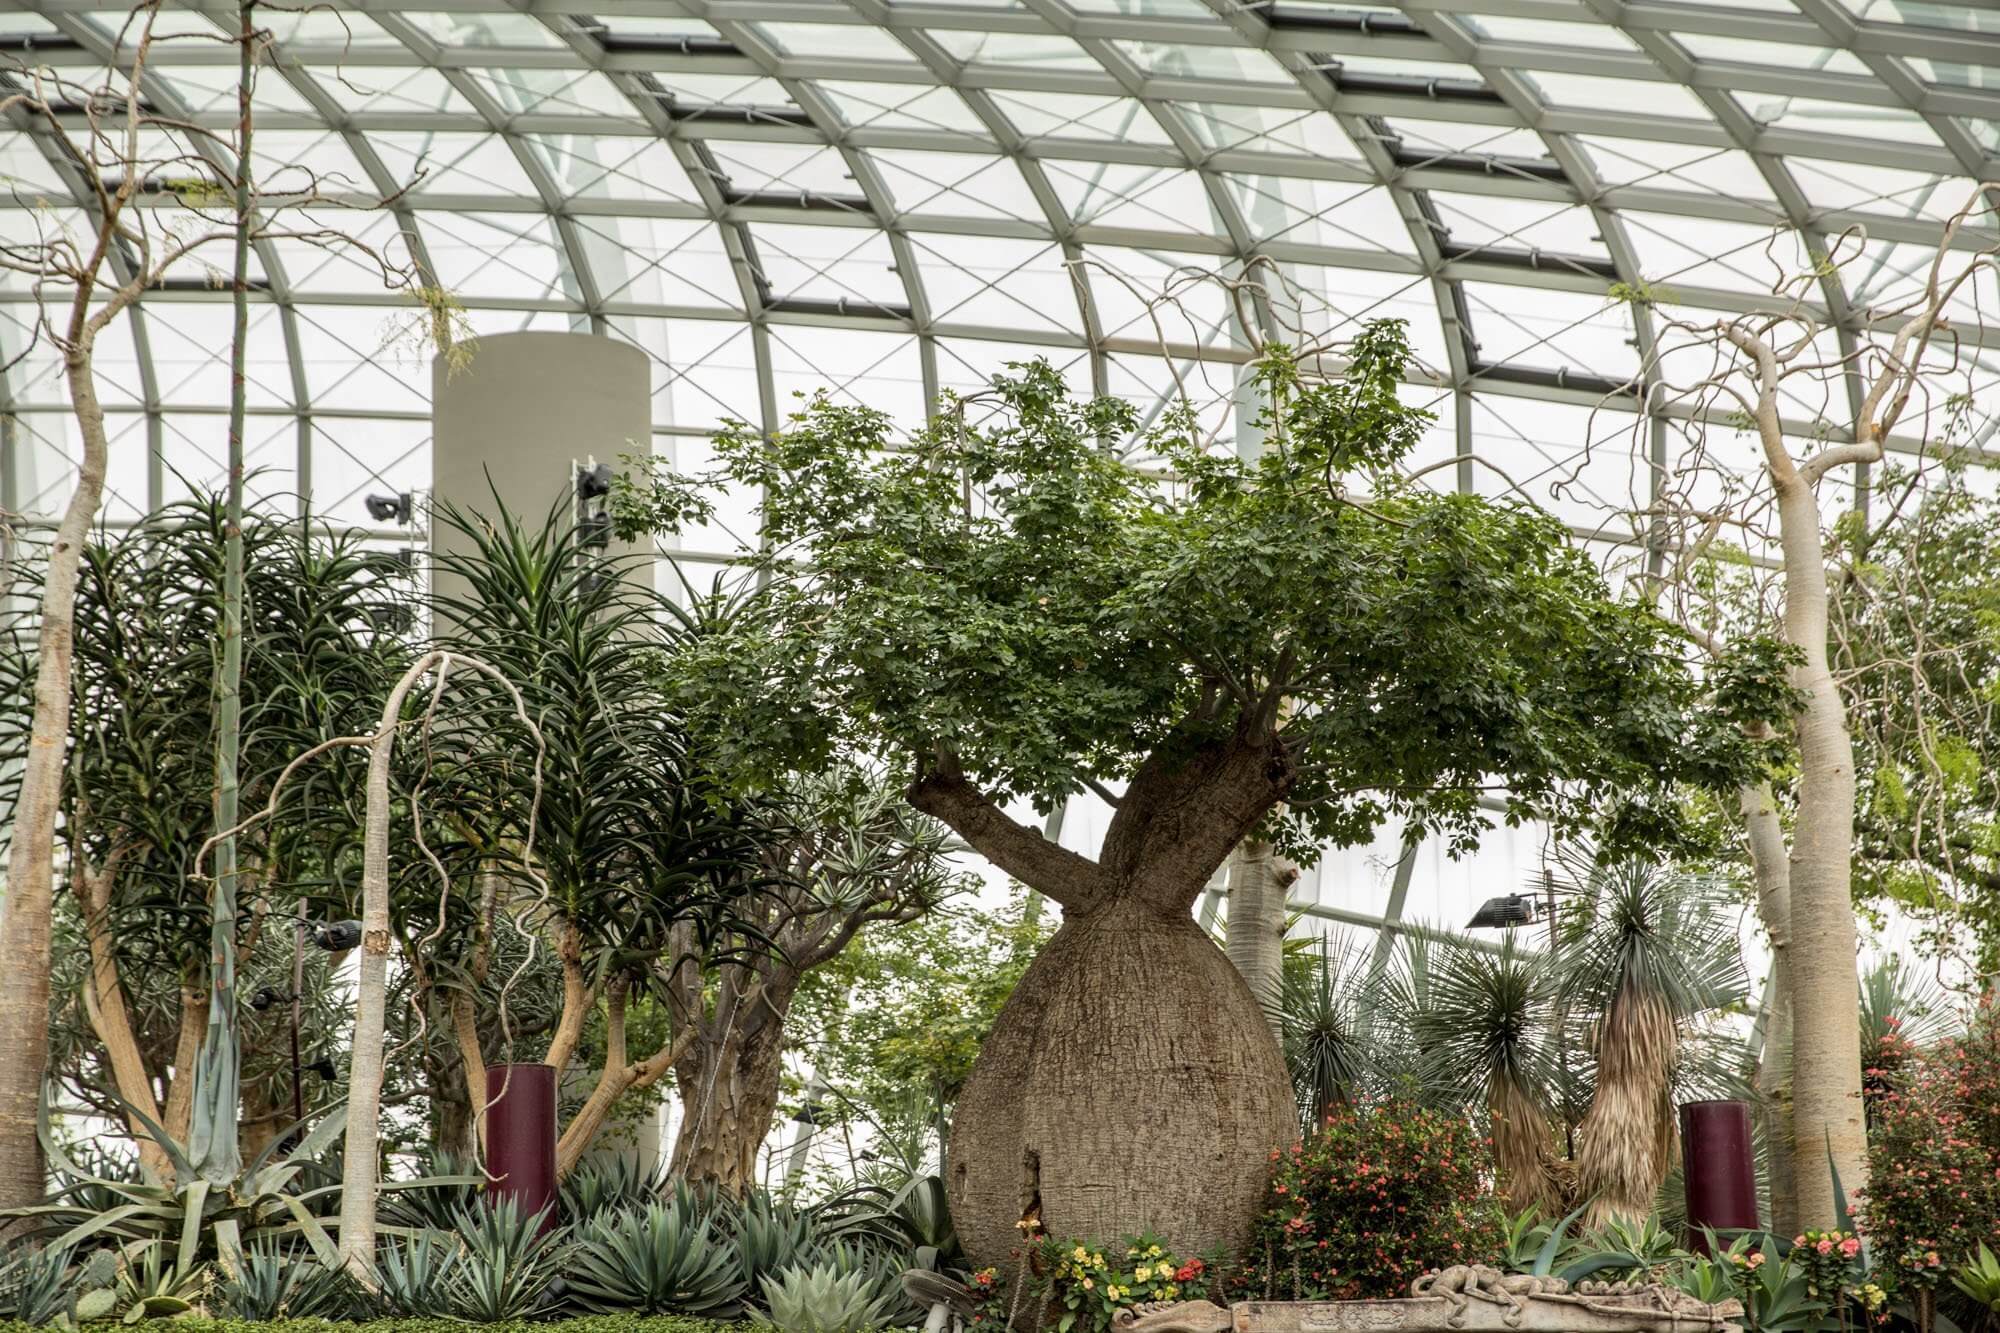 The baobabs in the Flower Dome of Gardens by the Bay in Singapore